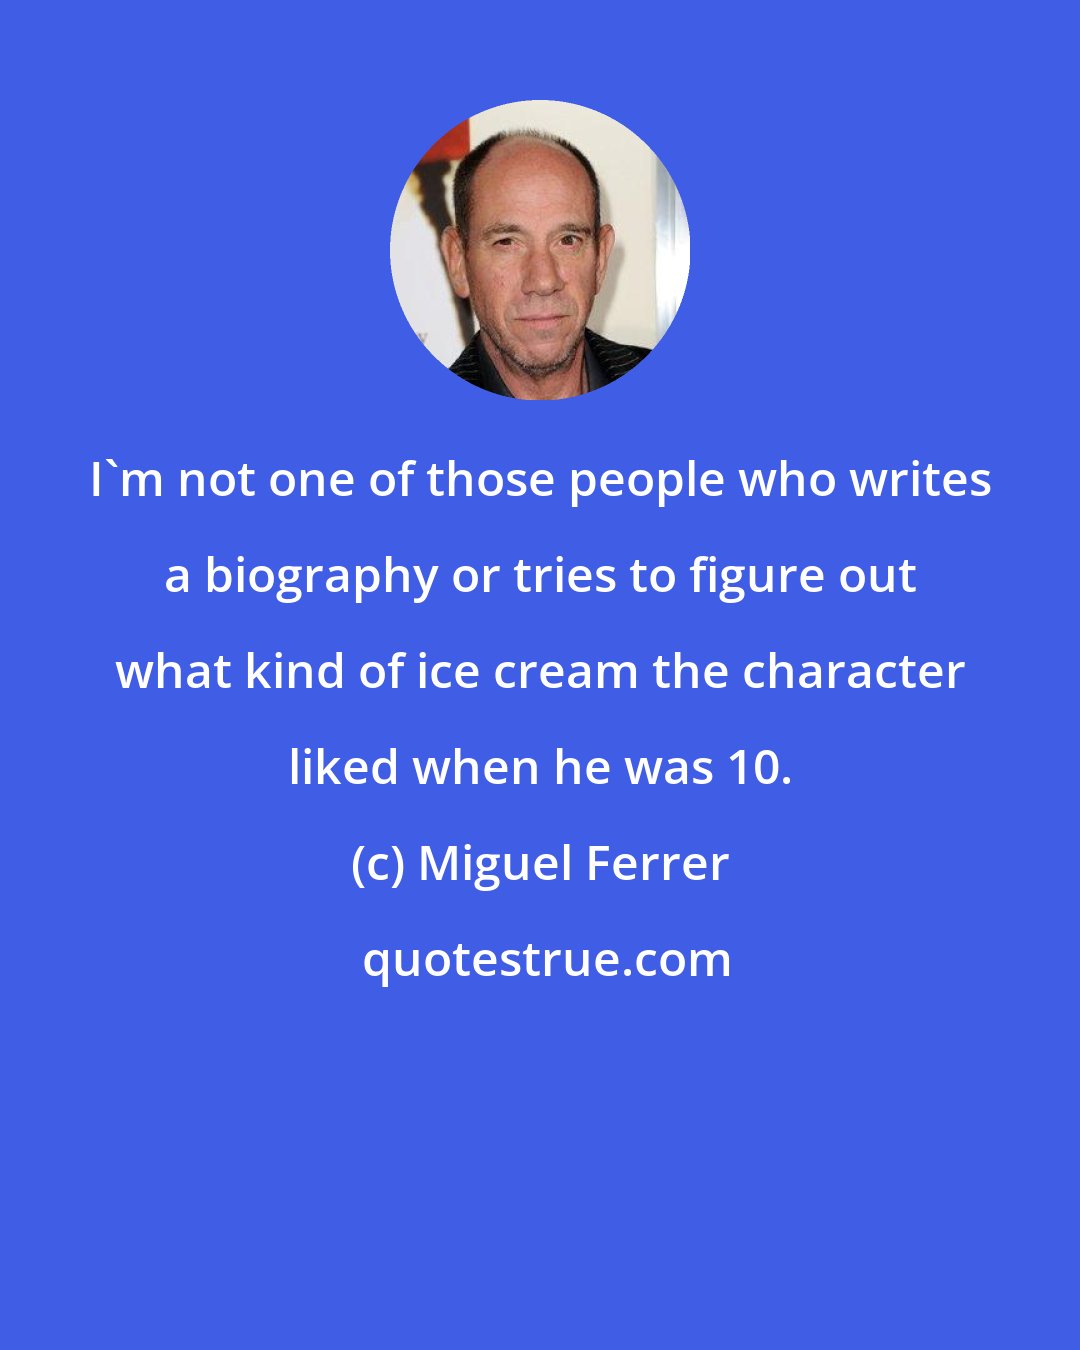 Miguel Ferrer: I'm not one of those people who writes a biography or tries to figure out what kind of ice cream the character liked when he was 10.